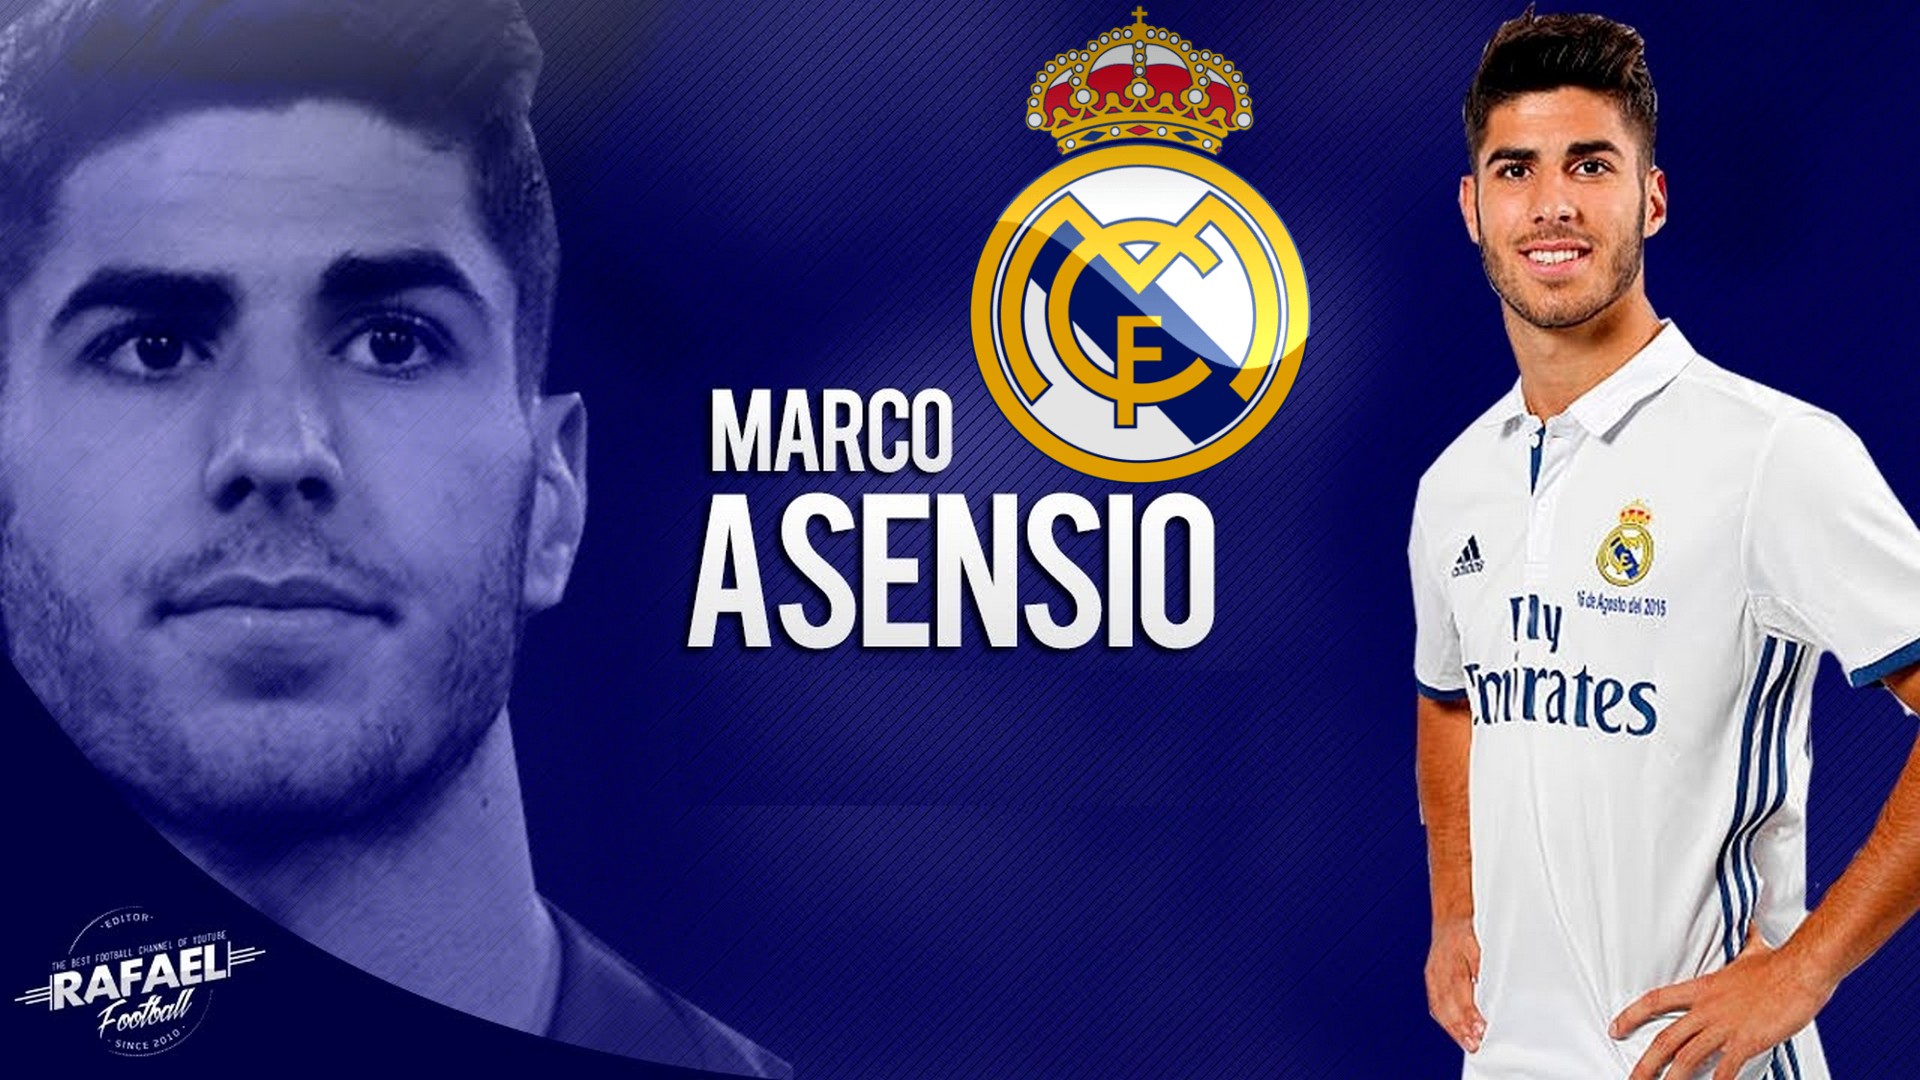 Wallpaper Desktop Marco Asensio Real Madrid HD with resolution 1920x1080 pixel. You can make this wallpaper for your Mac or Windows Desktop Background, iPhone, Android or Tablet and another Smartphone device